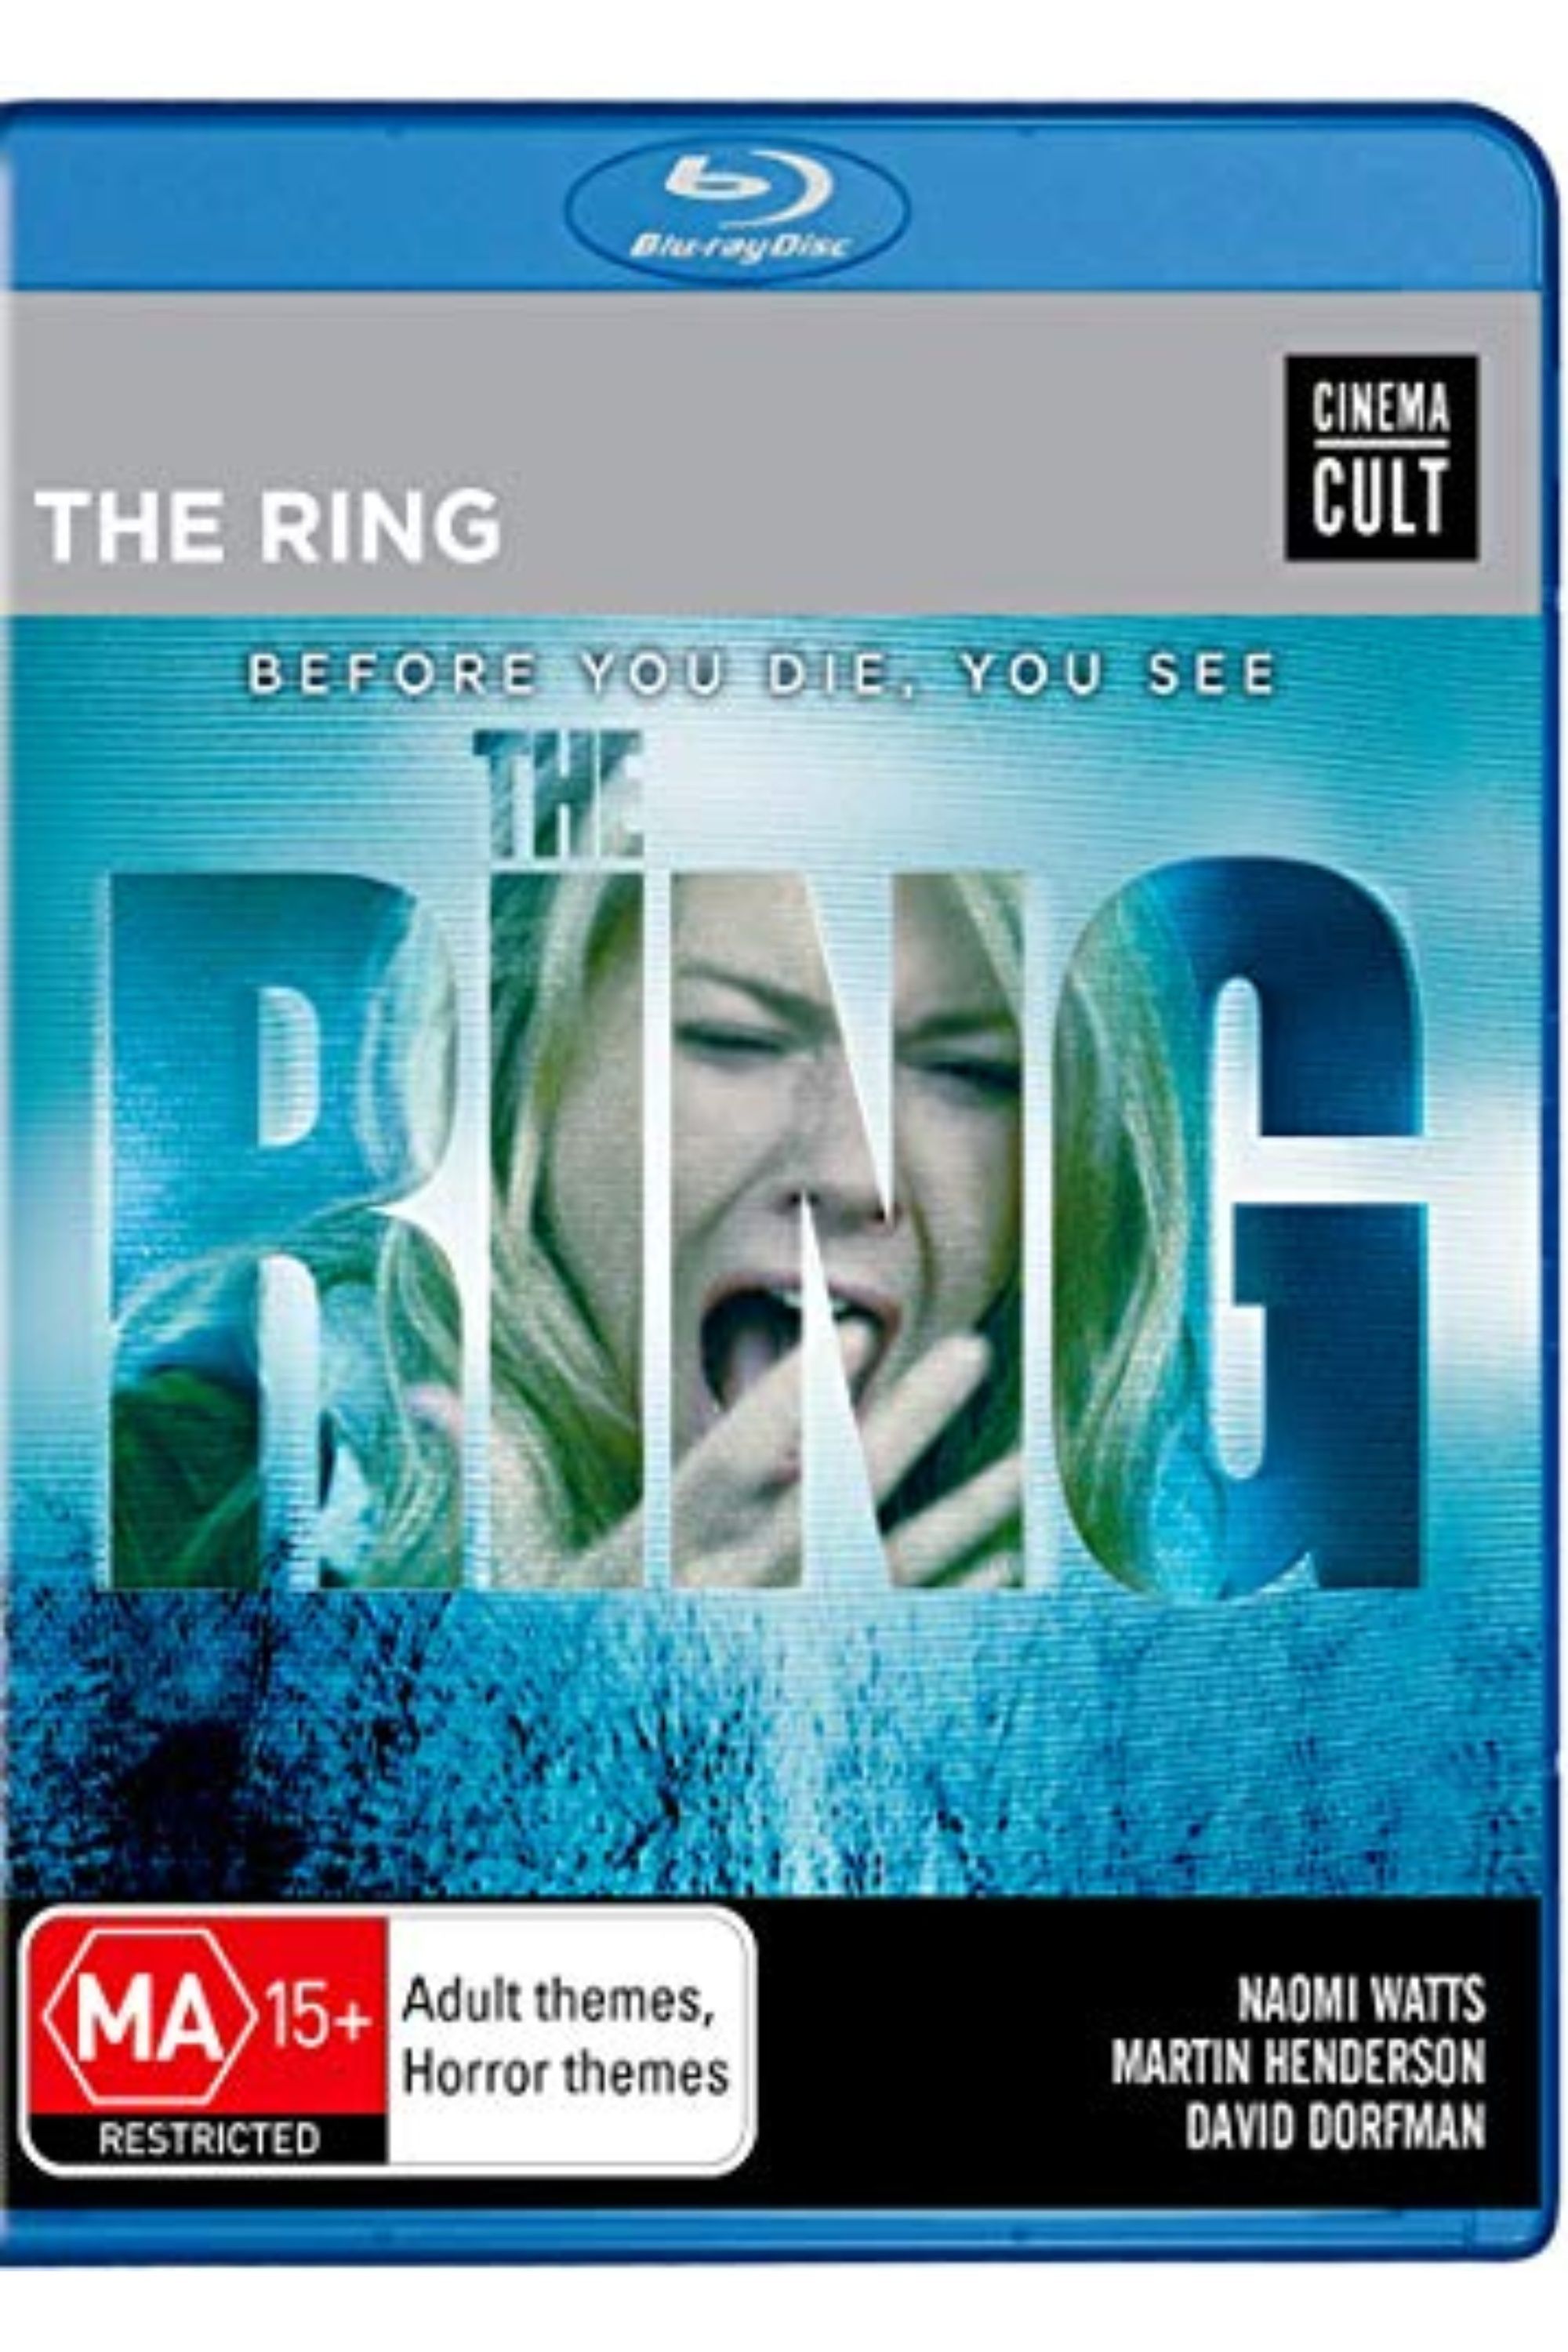 the ring blu-ray cover